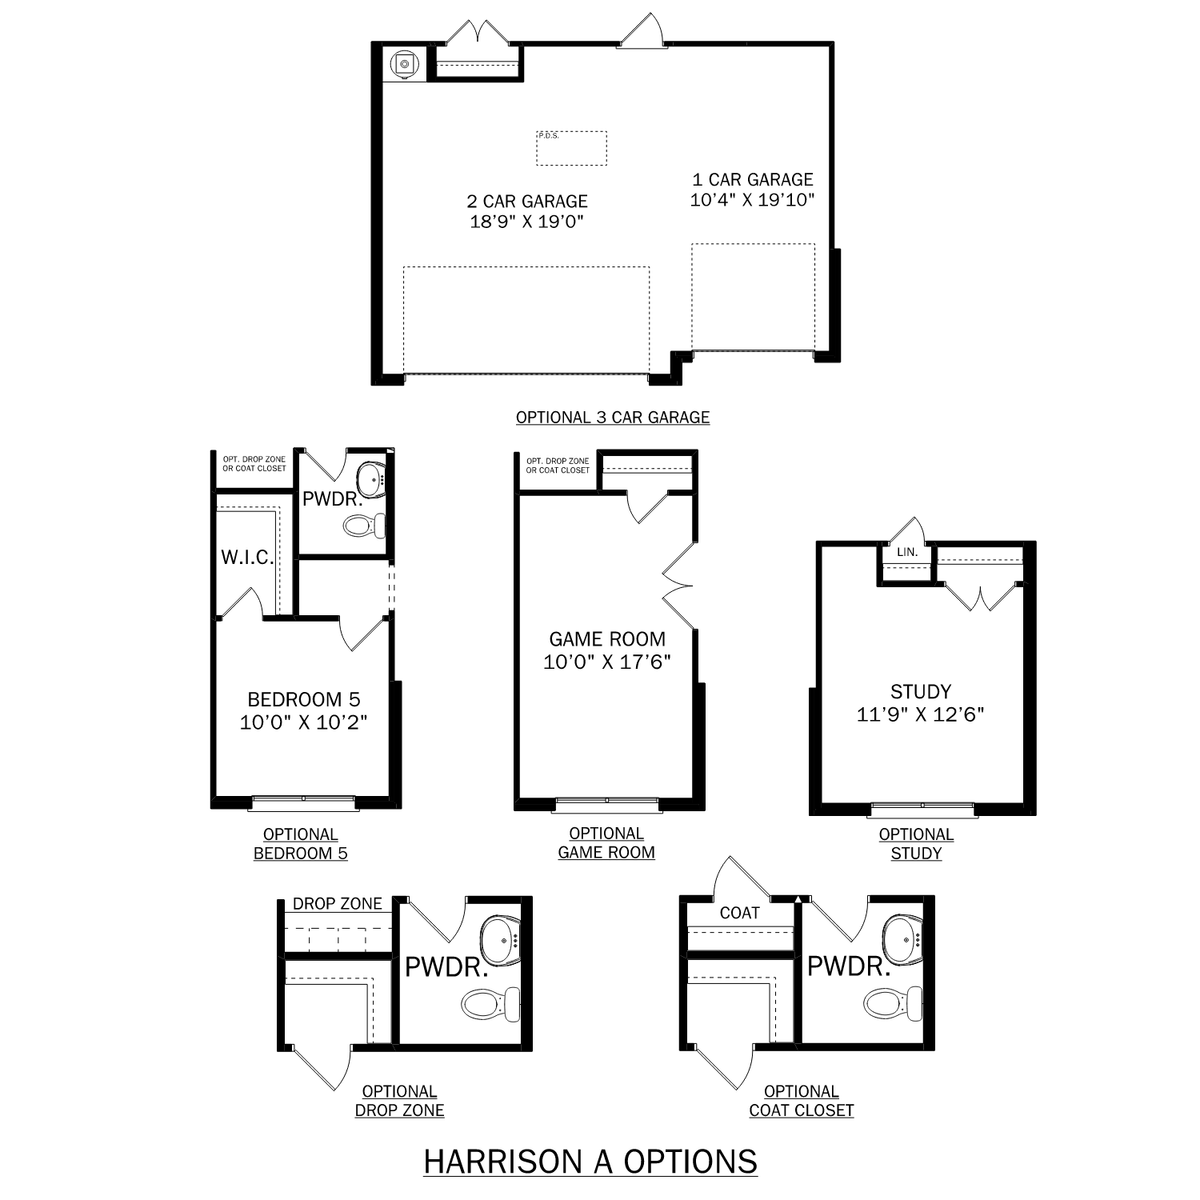 2 - The Harrison floor plan layout for 233 White Horse Way in Davidson Homes' Kendall Downs community.